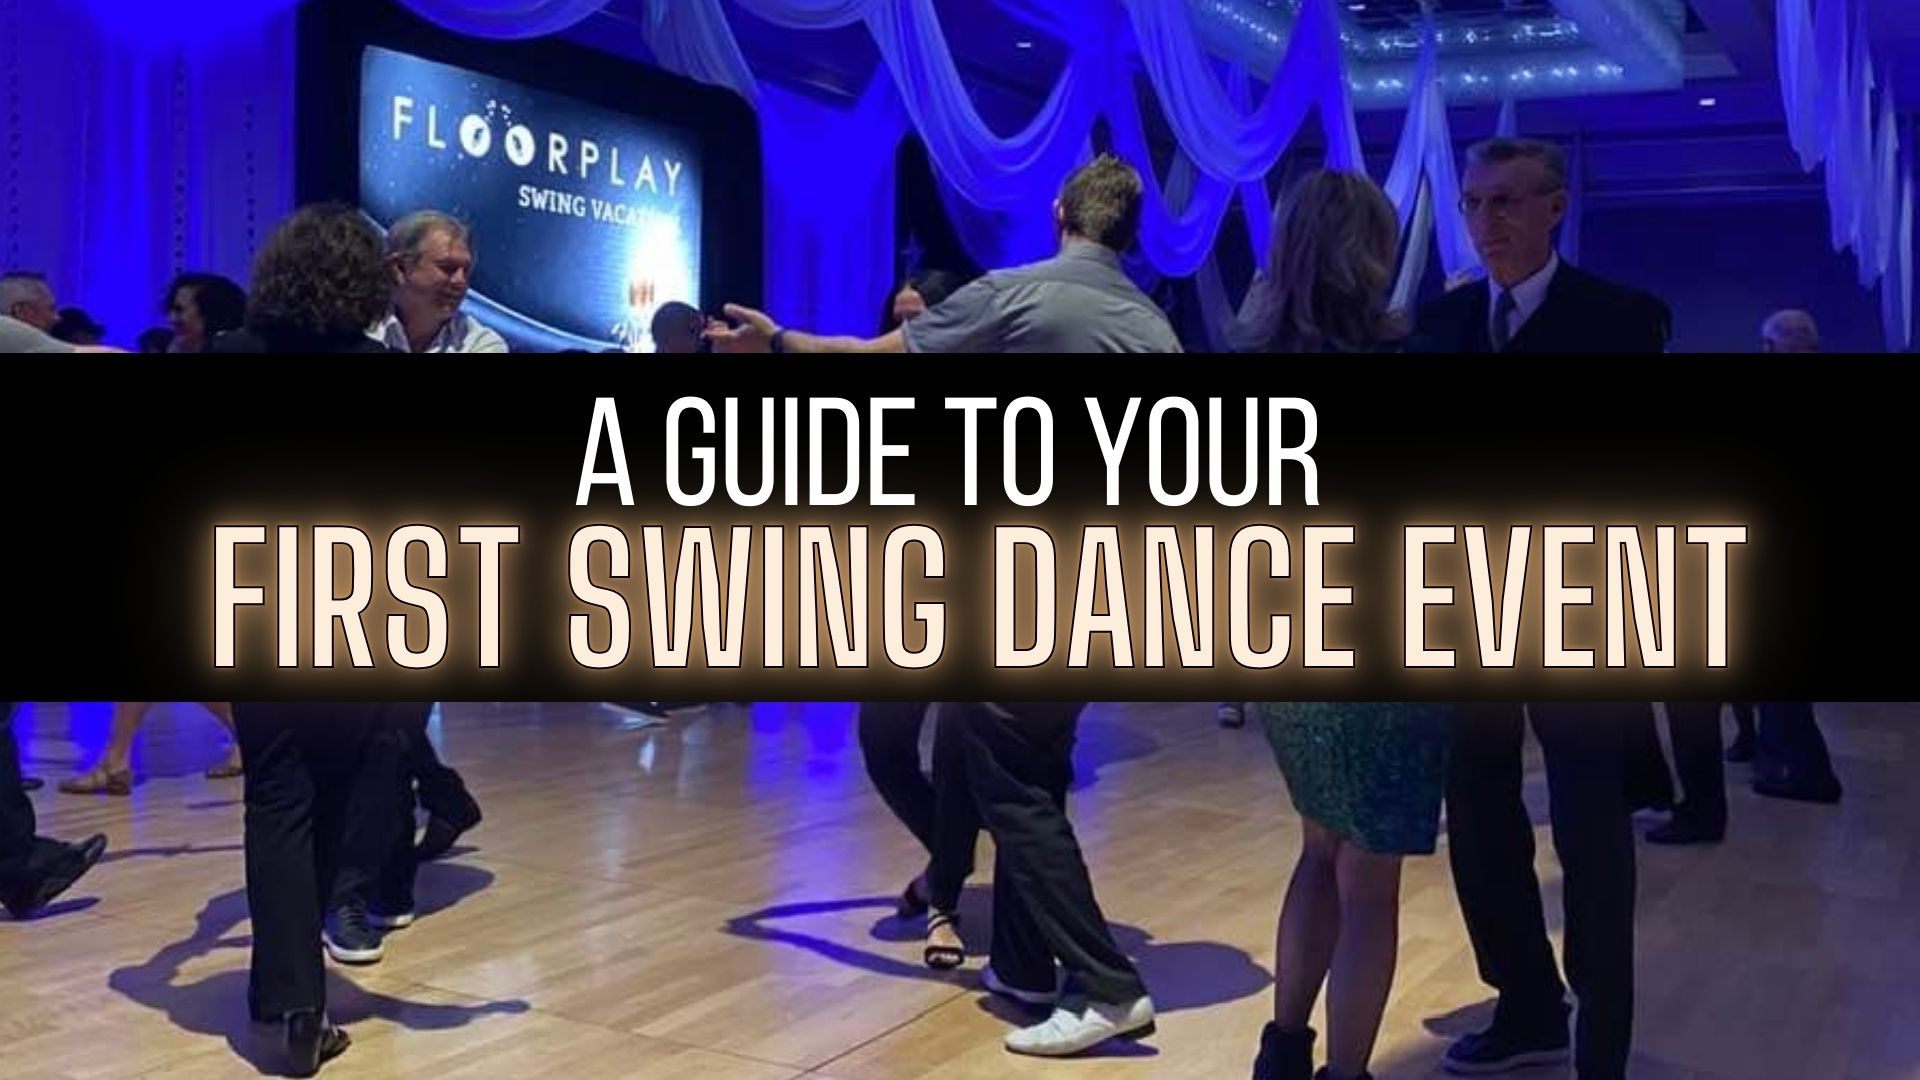 A title image packed dance floor with late night dancers enjoying a west coast swing new years eve event!